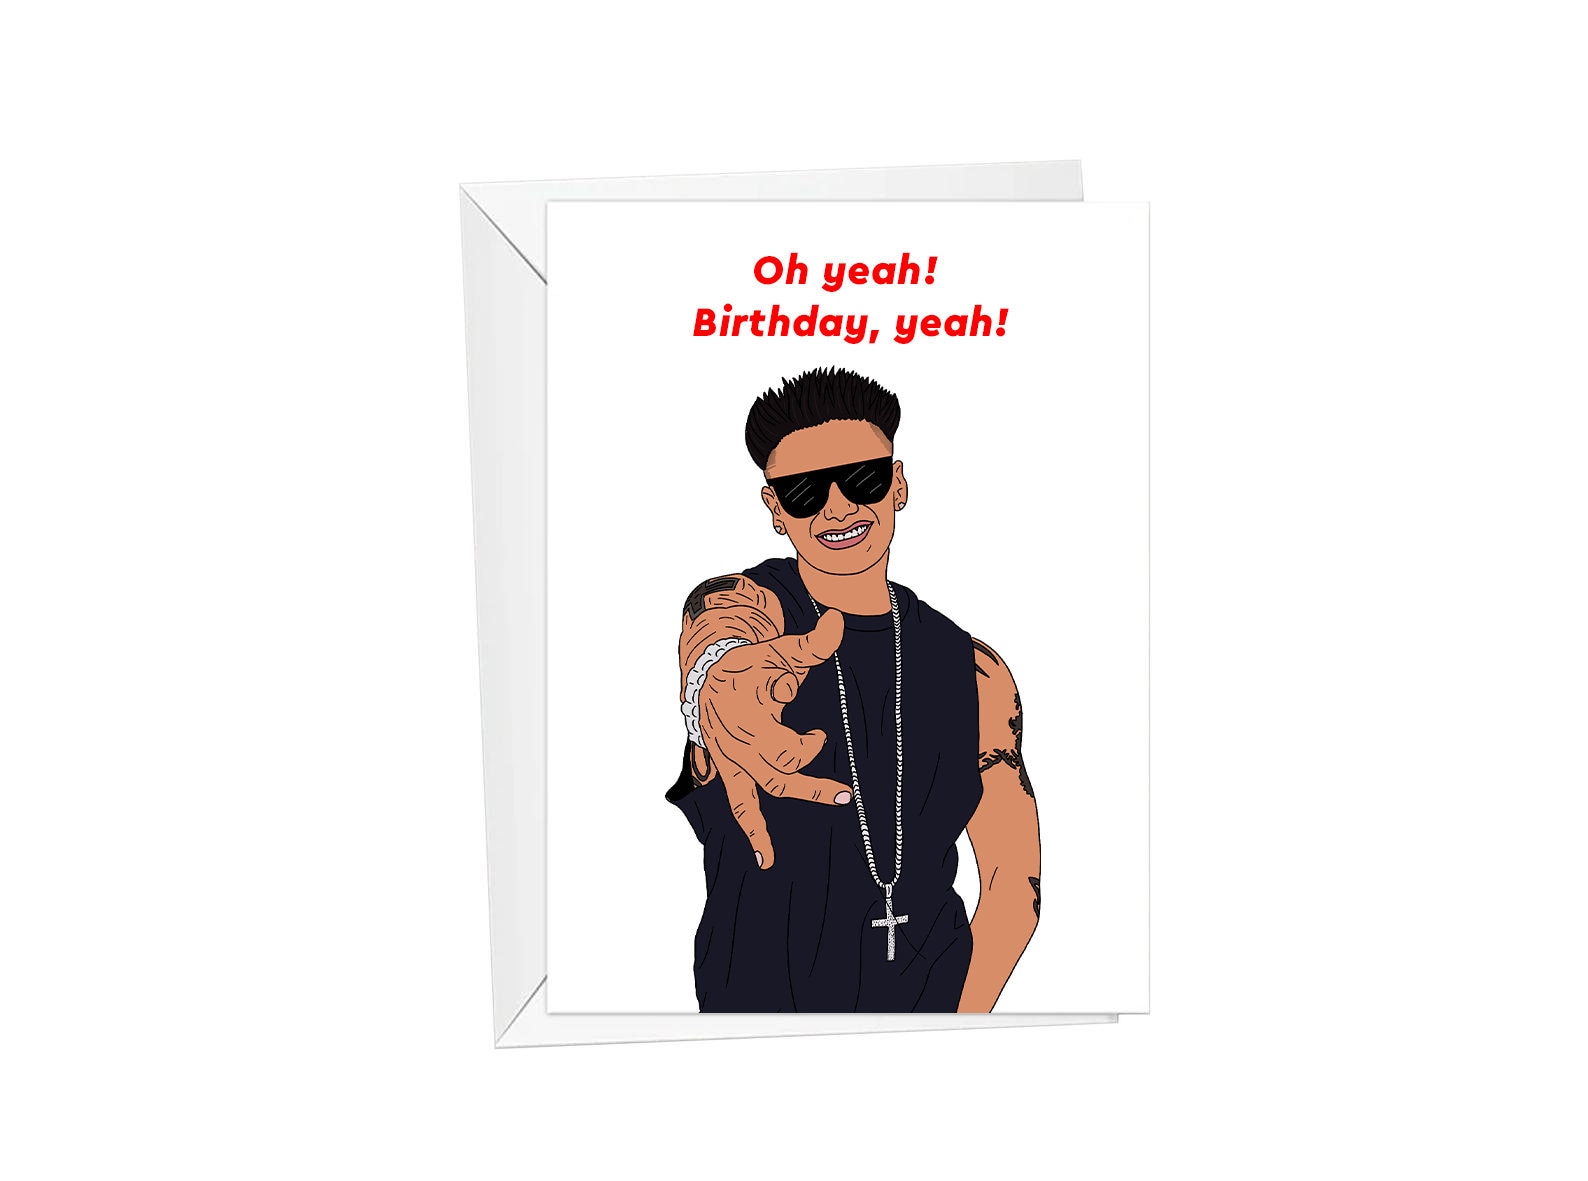 SNOOKI FROM JERSEY SHORE Greeting Card for Sale by ematzzz